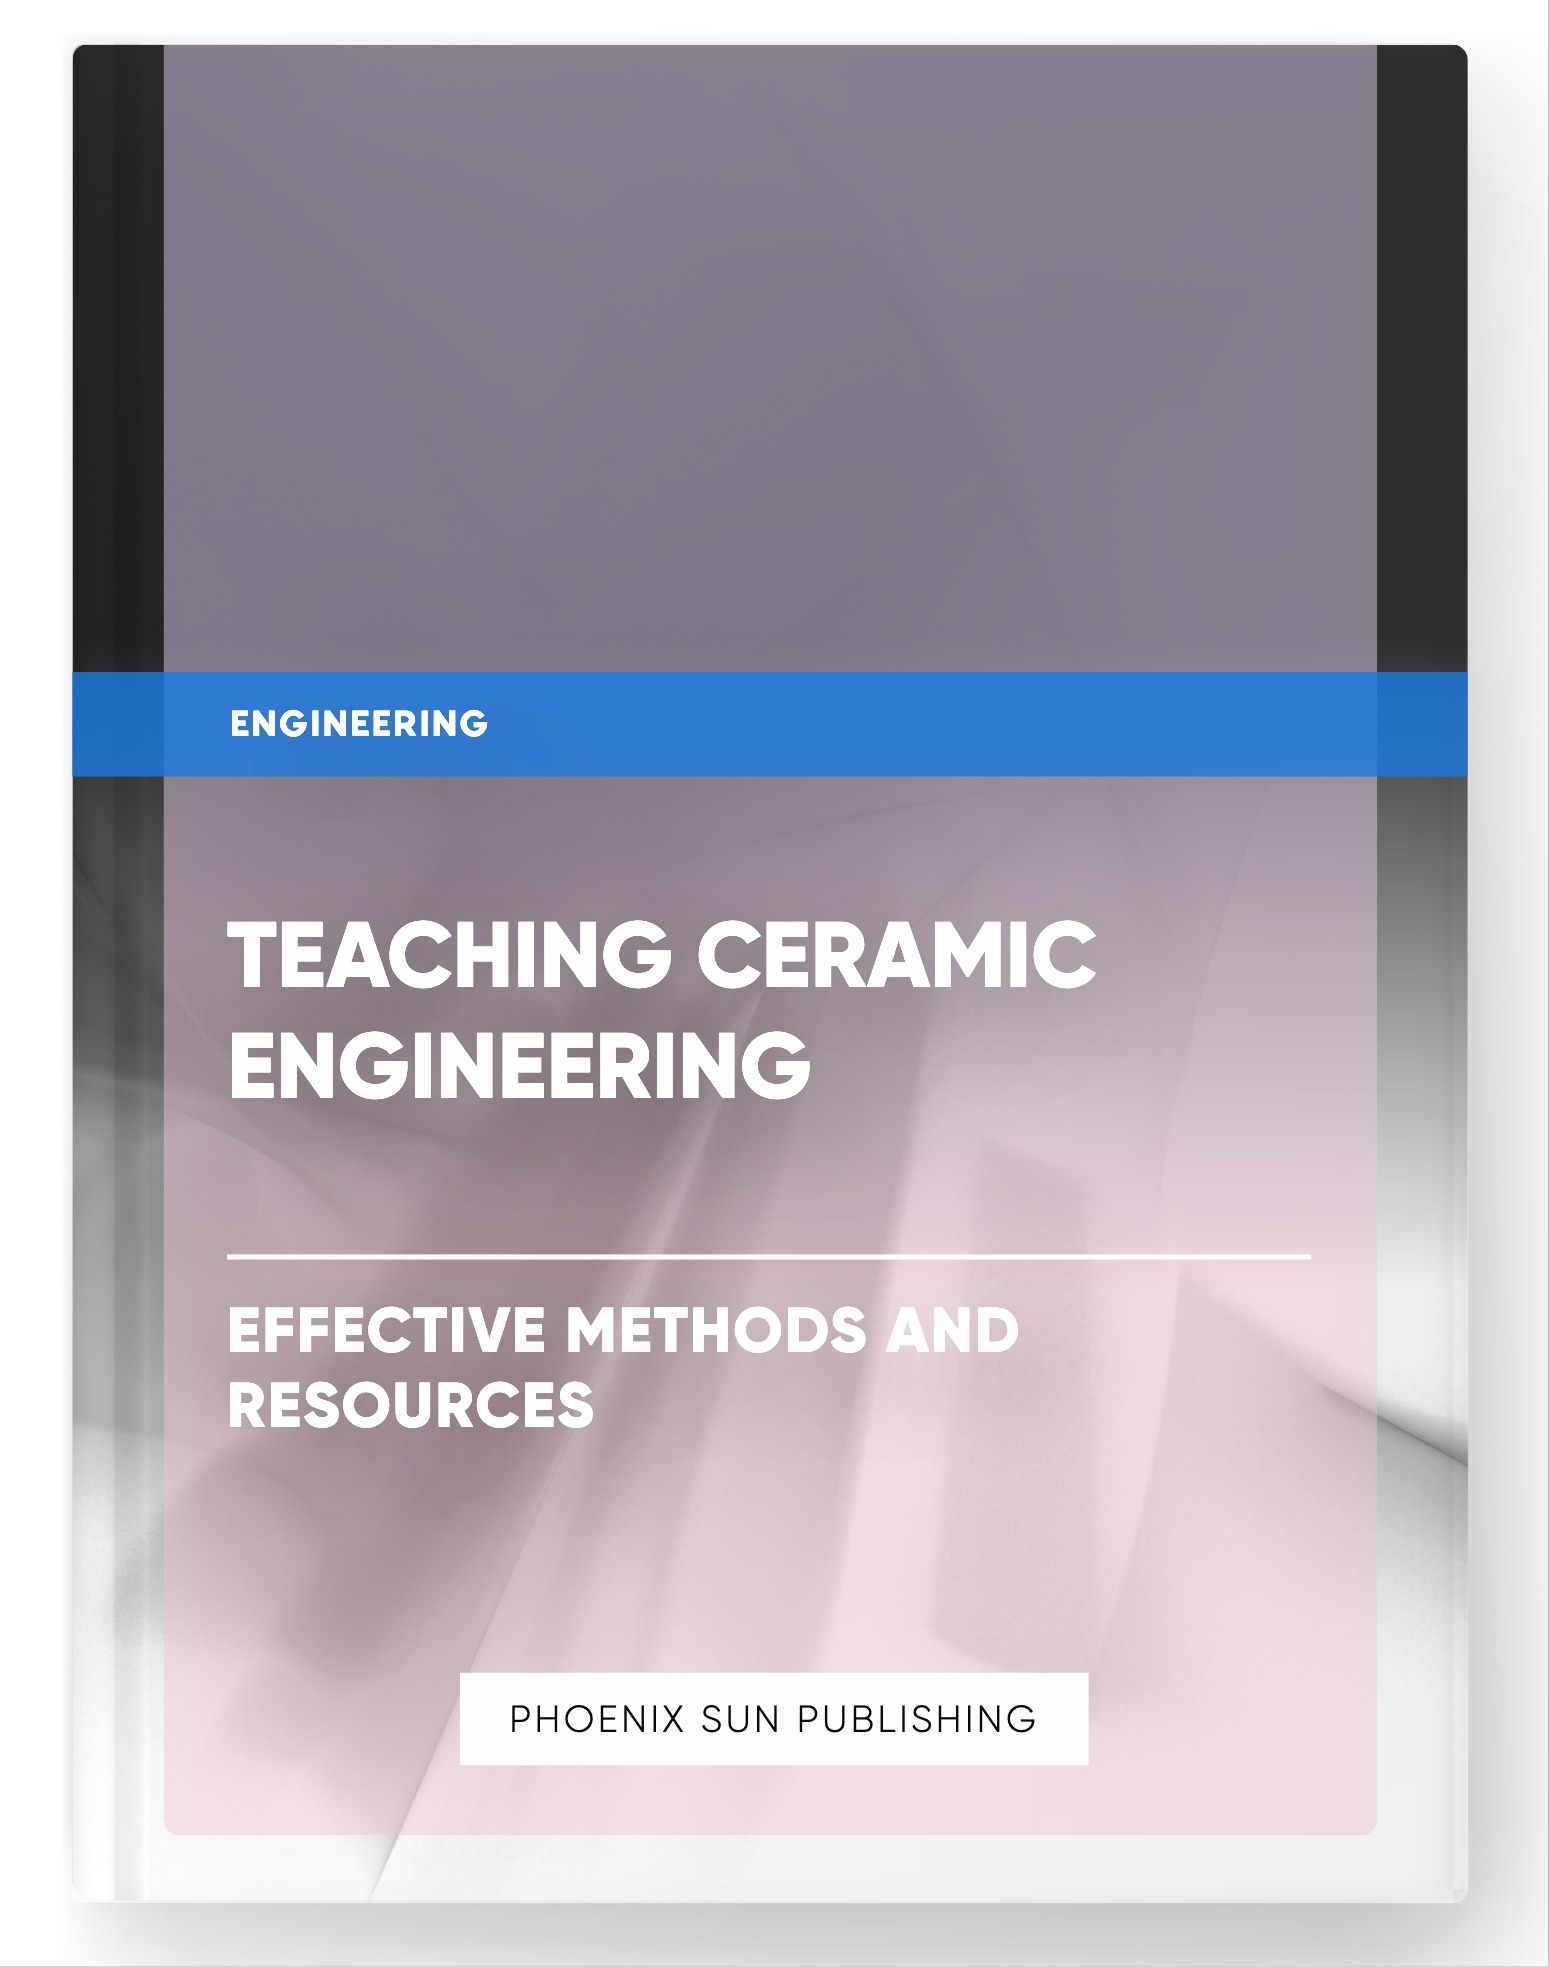 Teaching Ceramic Engineering – Effective Methods and Resources